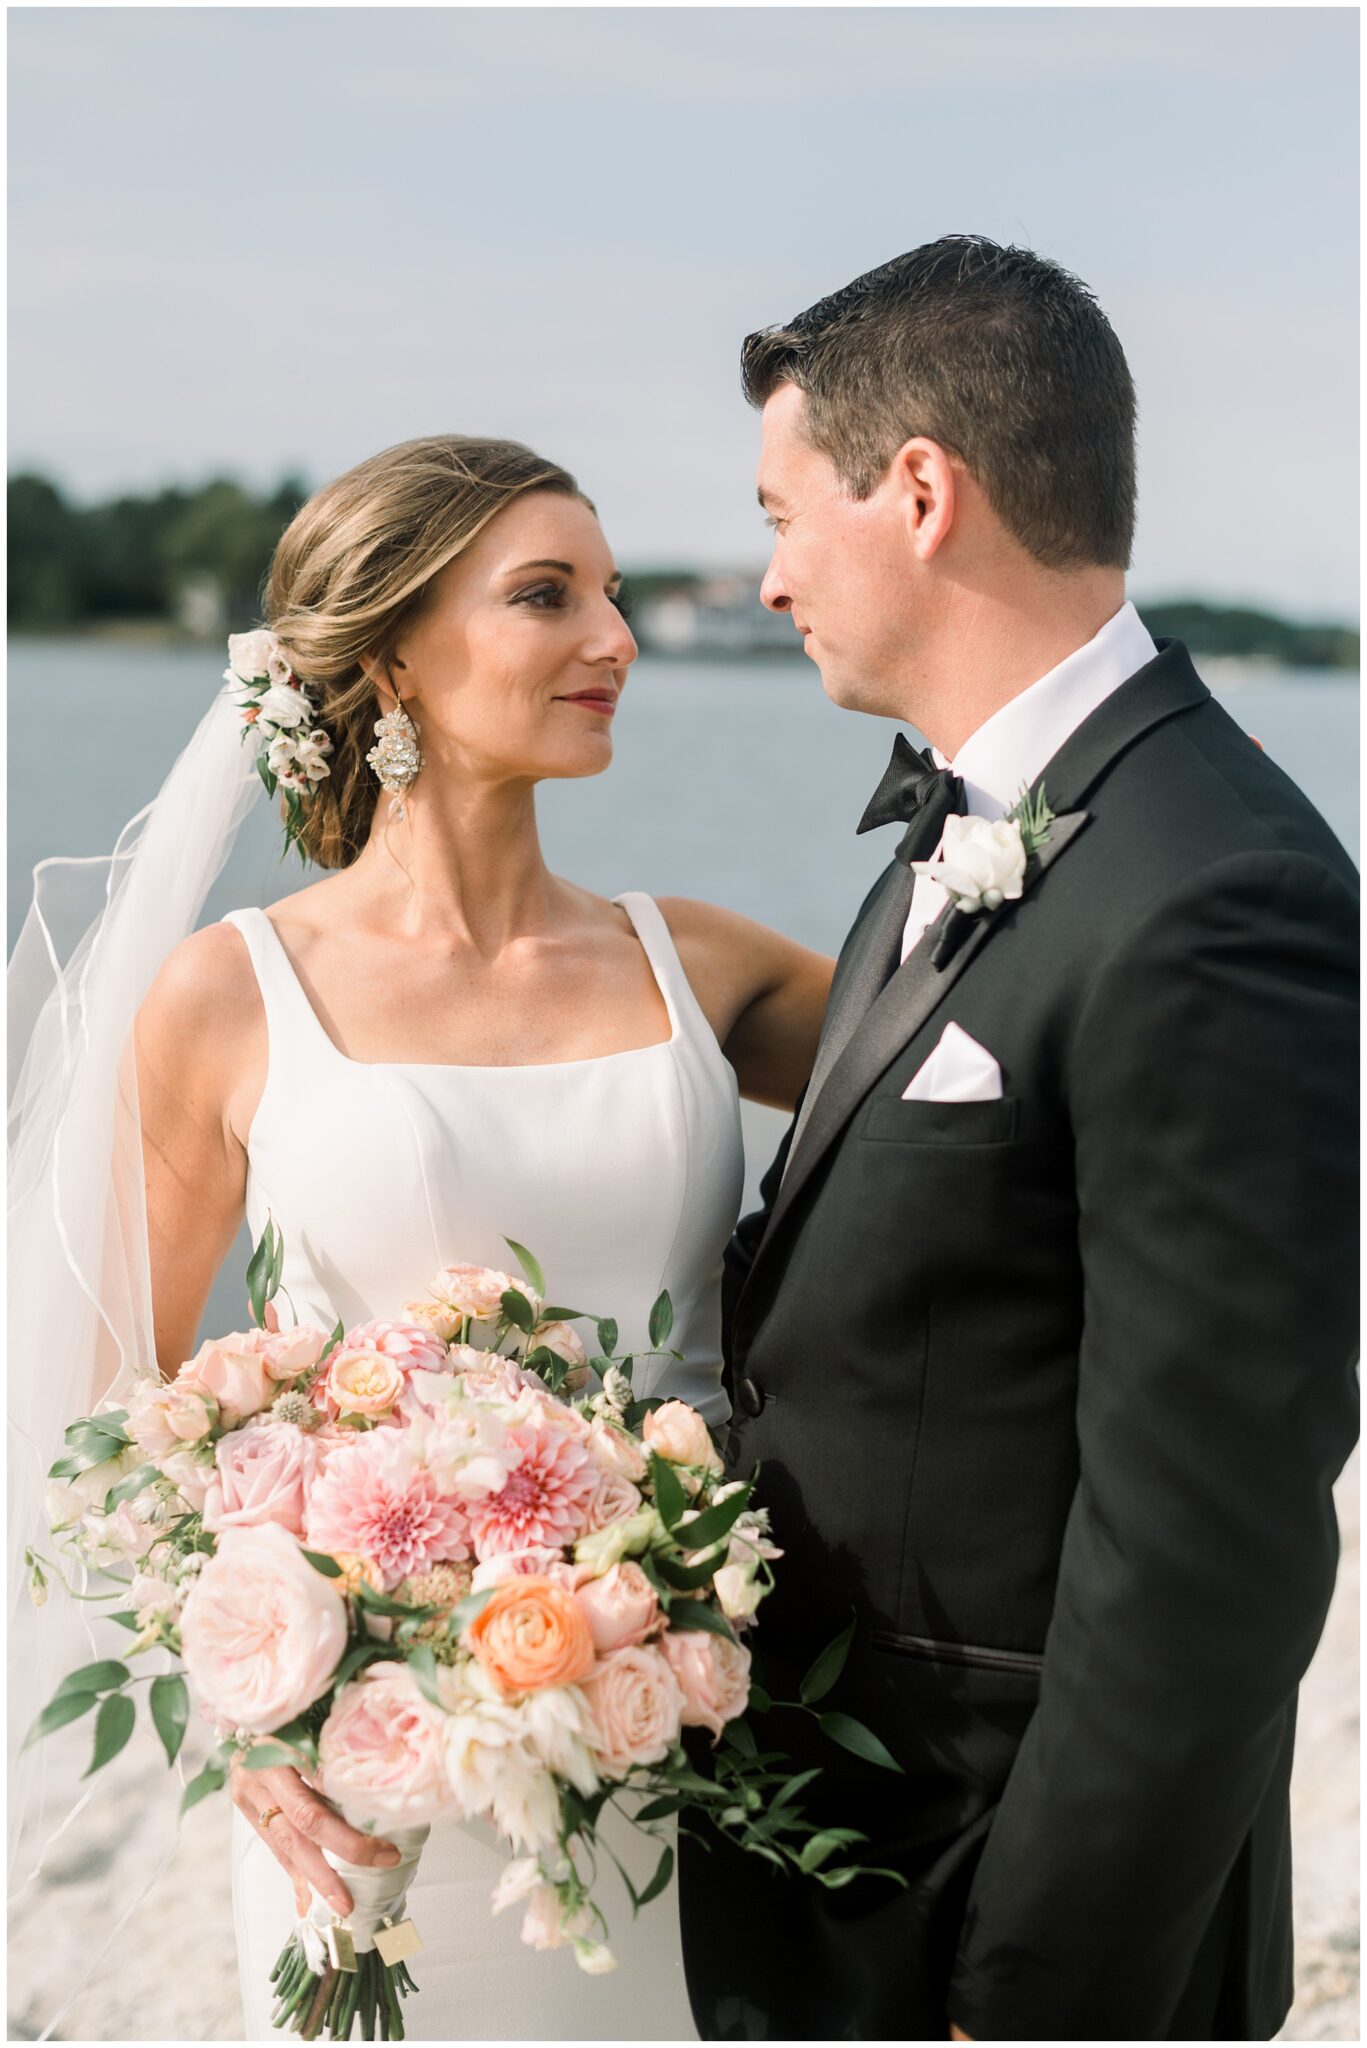 Michelle & Andrews Seacoast wedding photos at Wentworth country Club Wedding